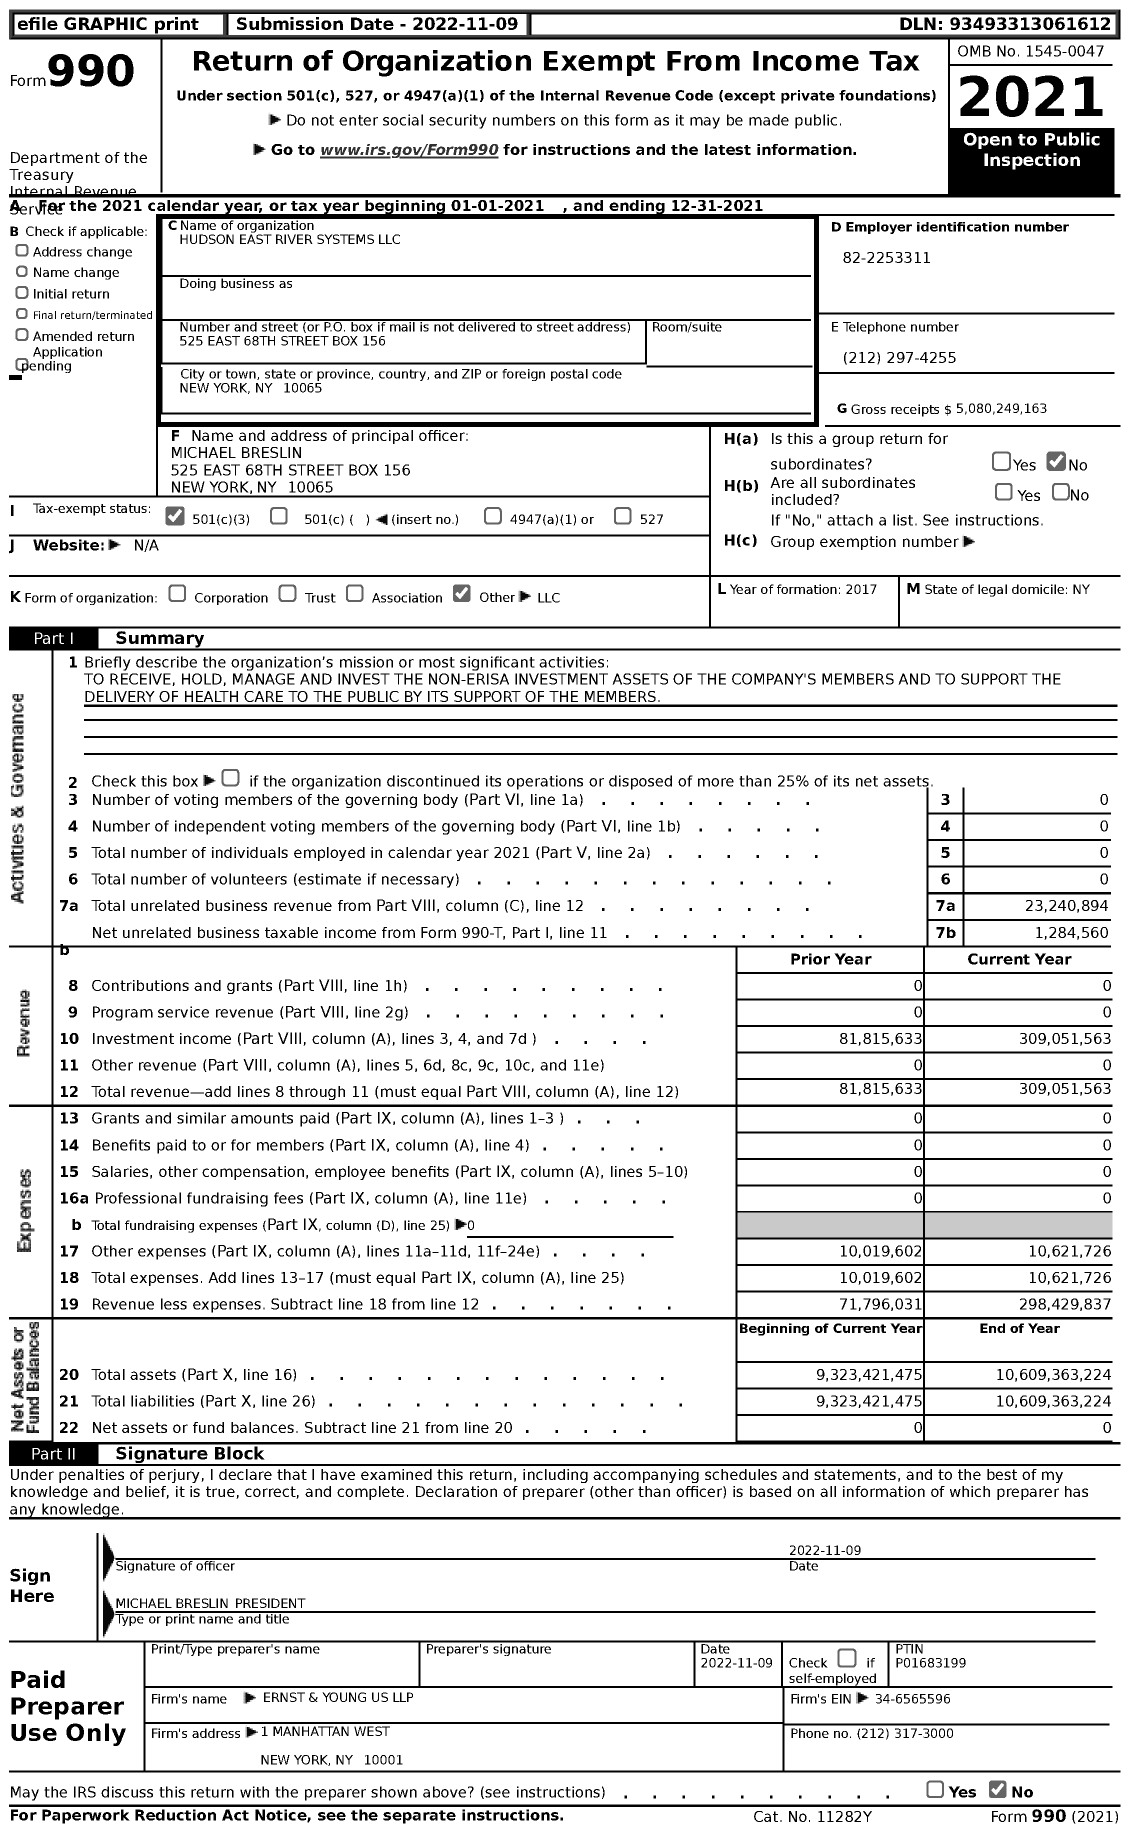 Image of first page of 2021 Form 990 for Hudson East River Systems LLC